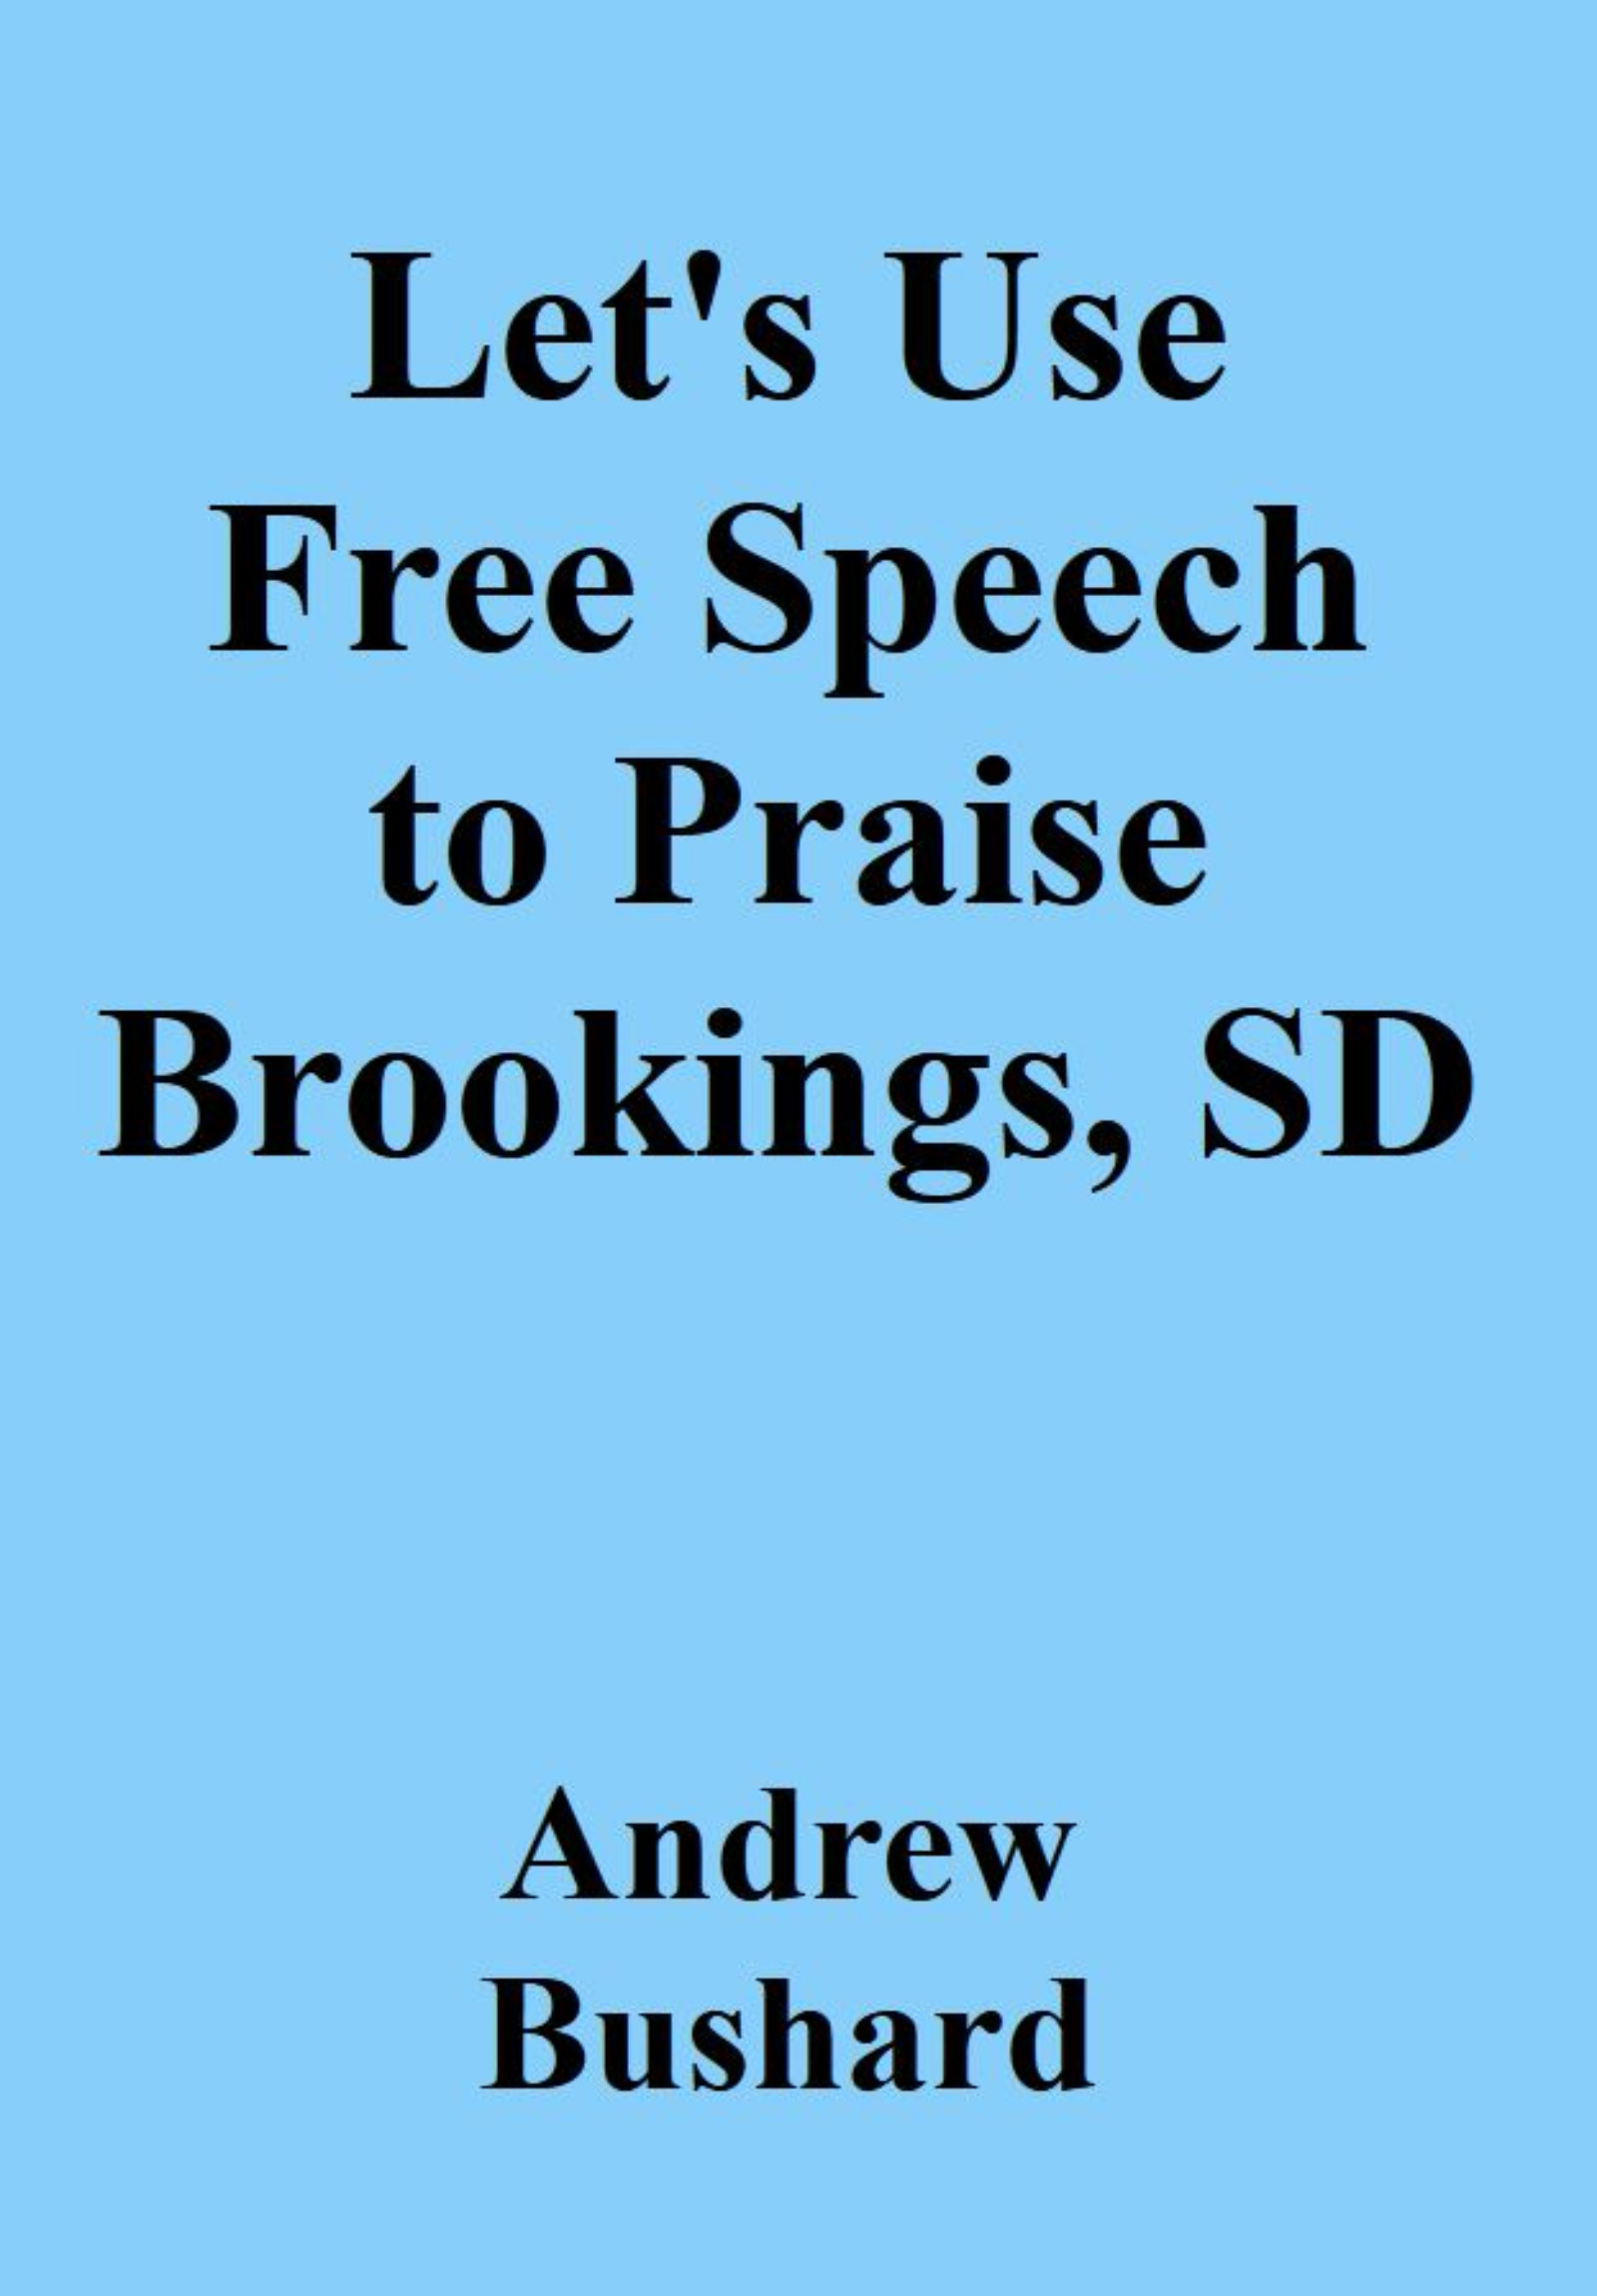 Let's Use Free Speech to Praise Brookings, SD's featured image